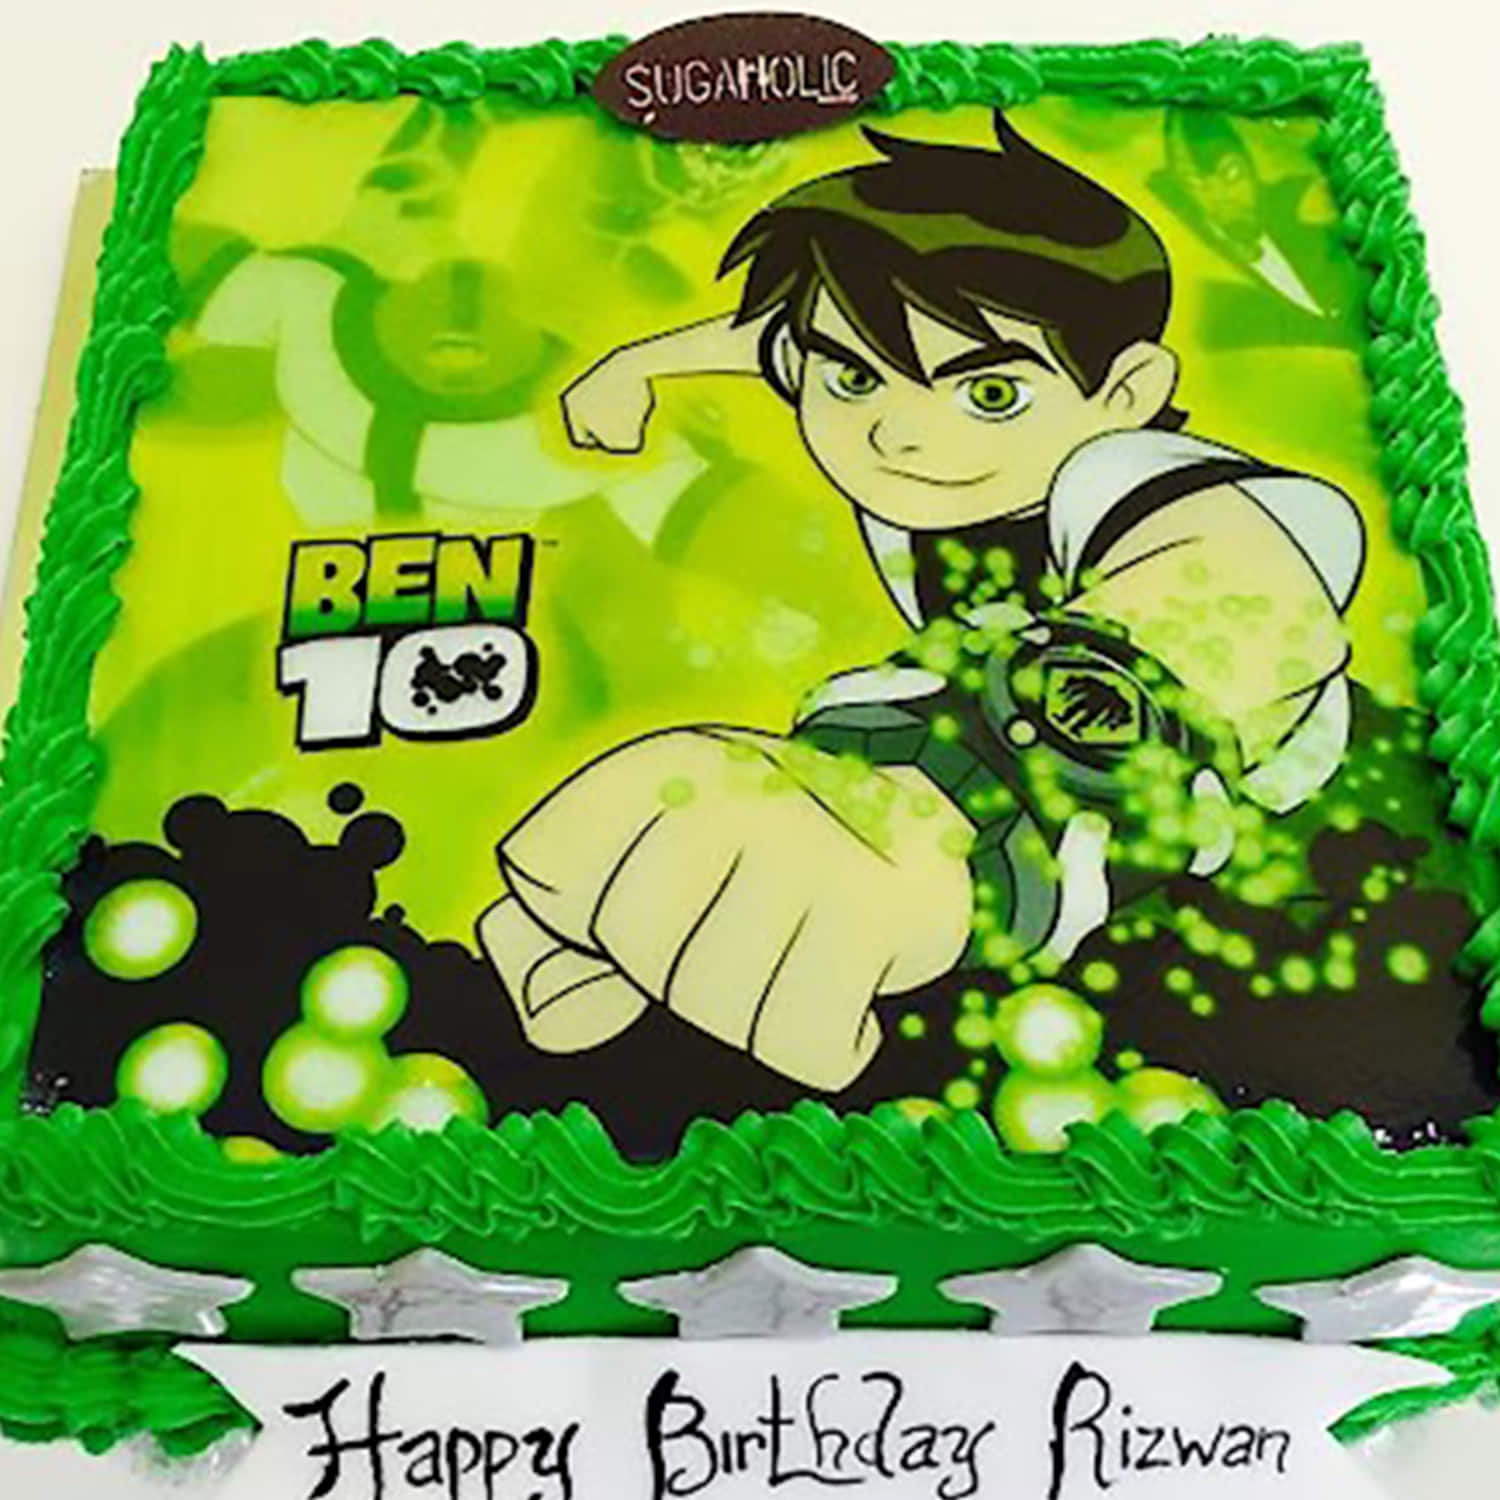 Ben 10 Theme cake| Cakes Online delivery Hyderabad|CakeSmash.in